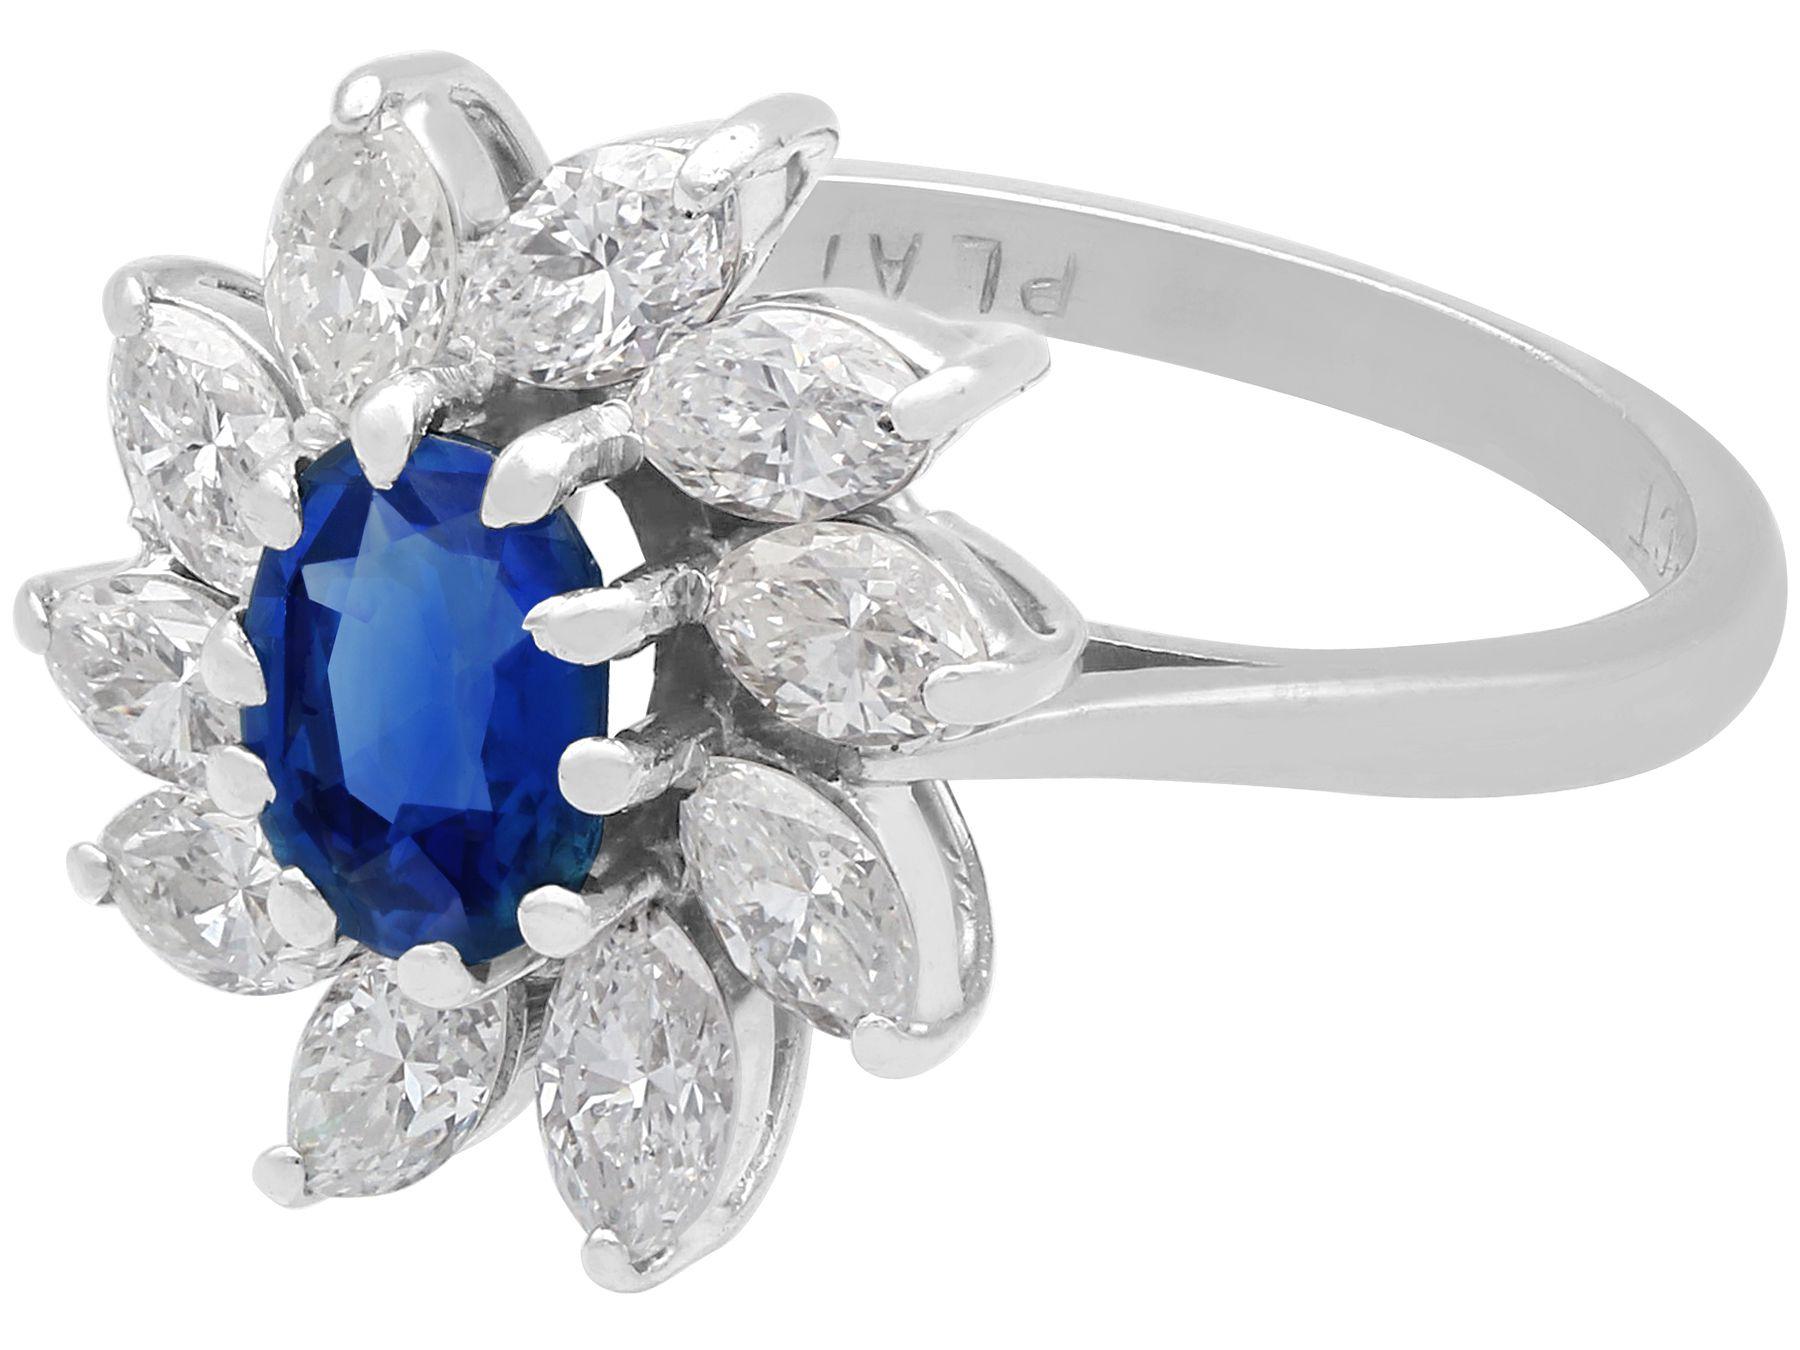 Oval Cut Vintage 1.20 Carat Sapphire and 2.25 Carat Diamond White Gold Cluster Ring